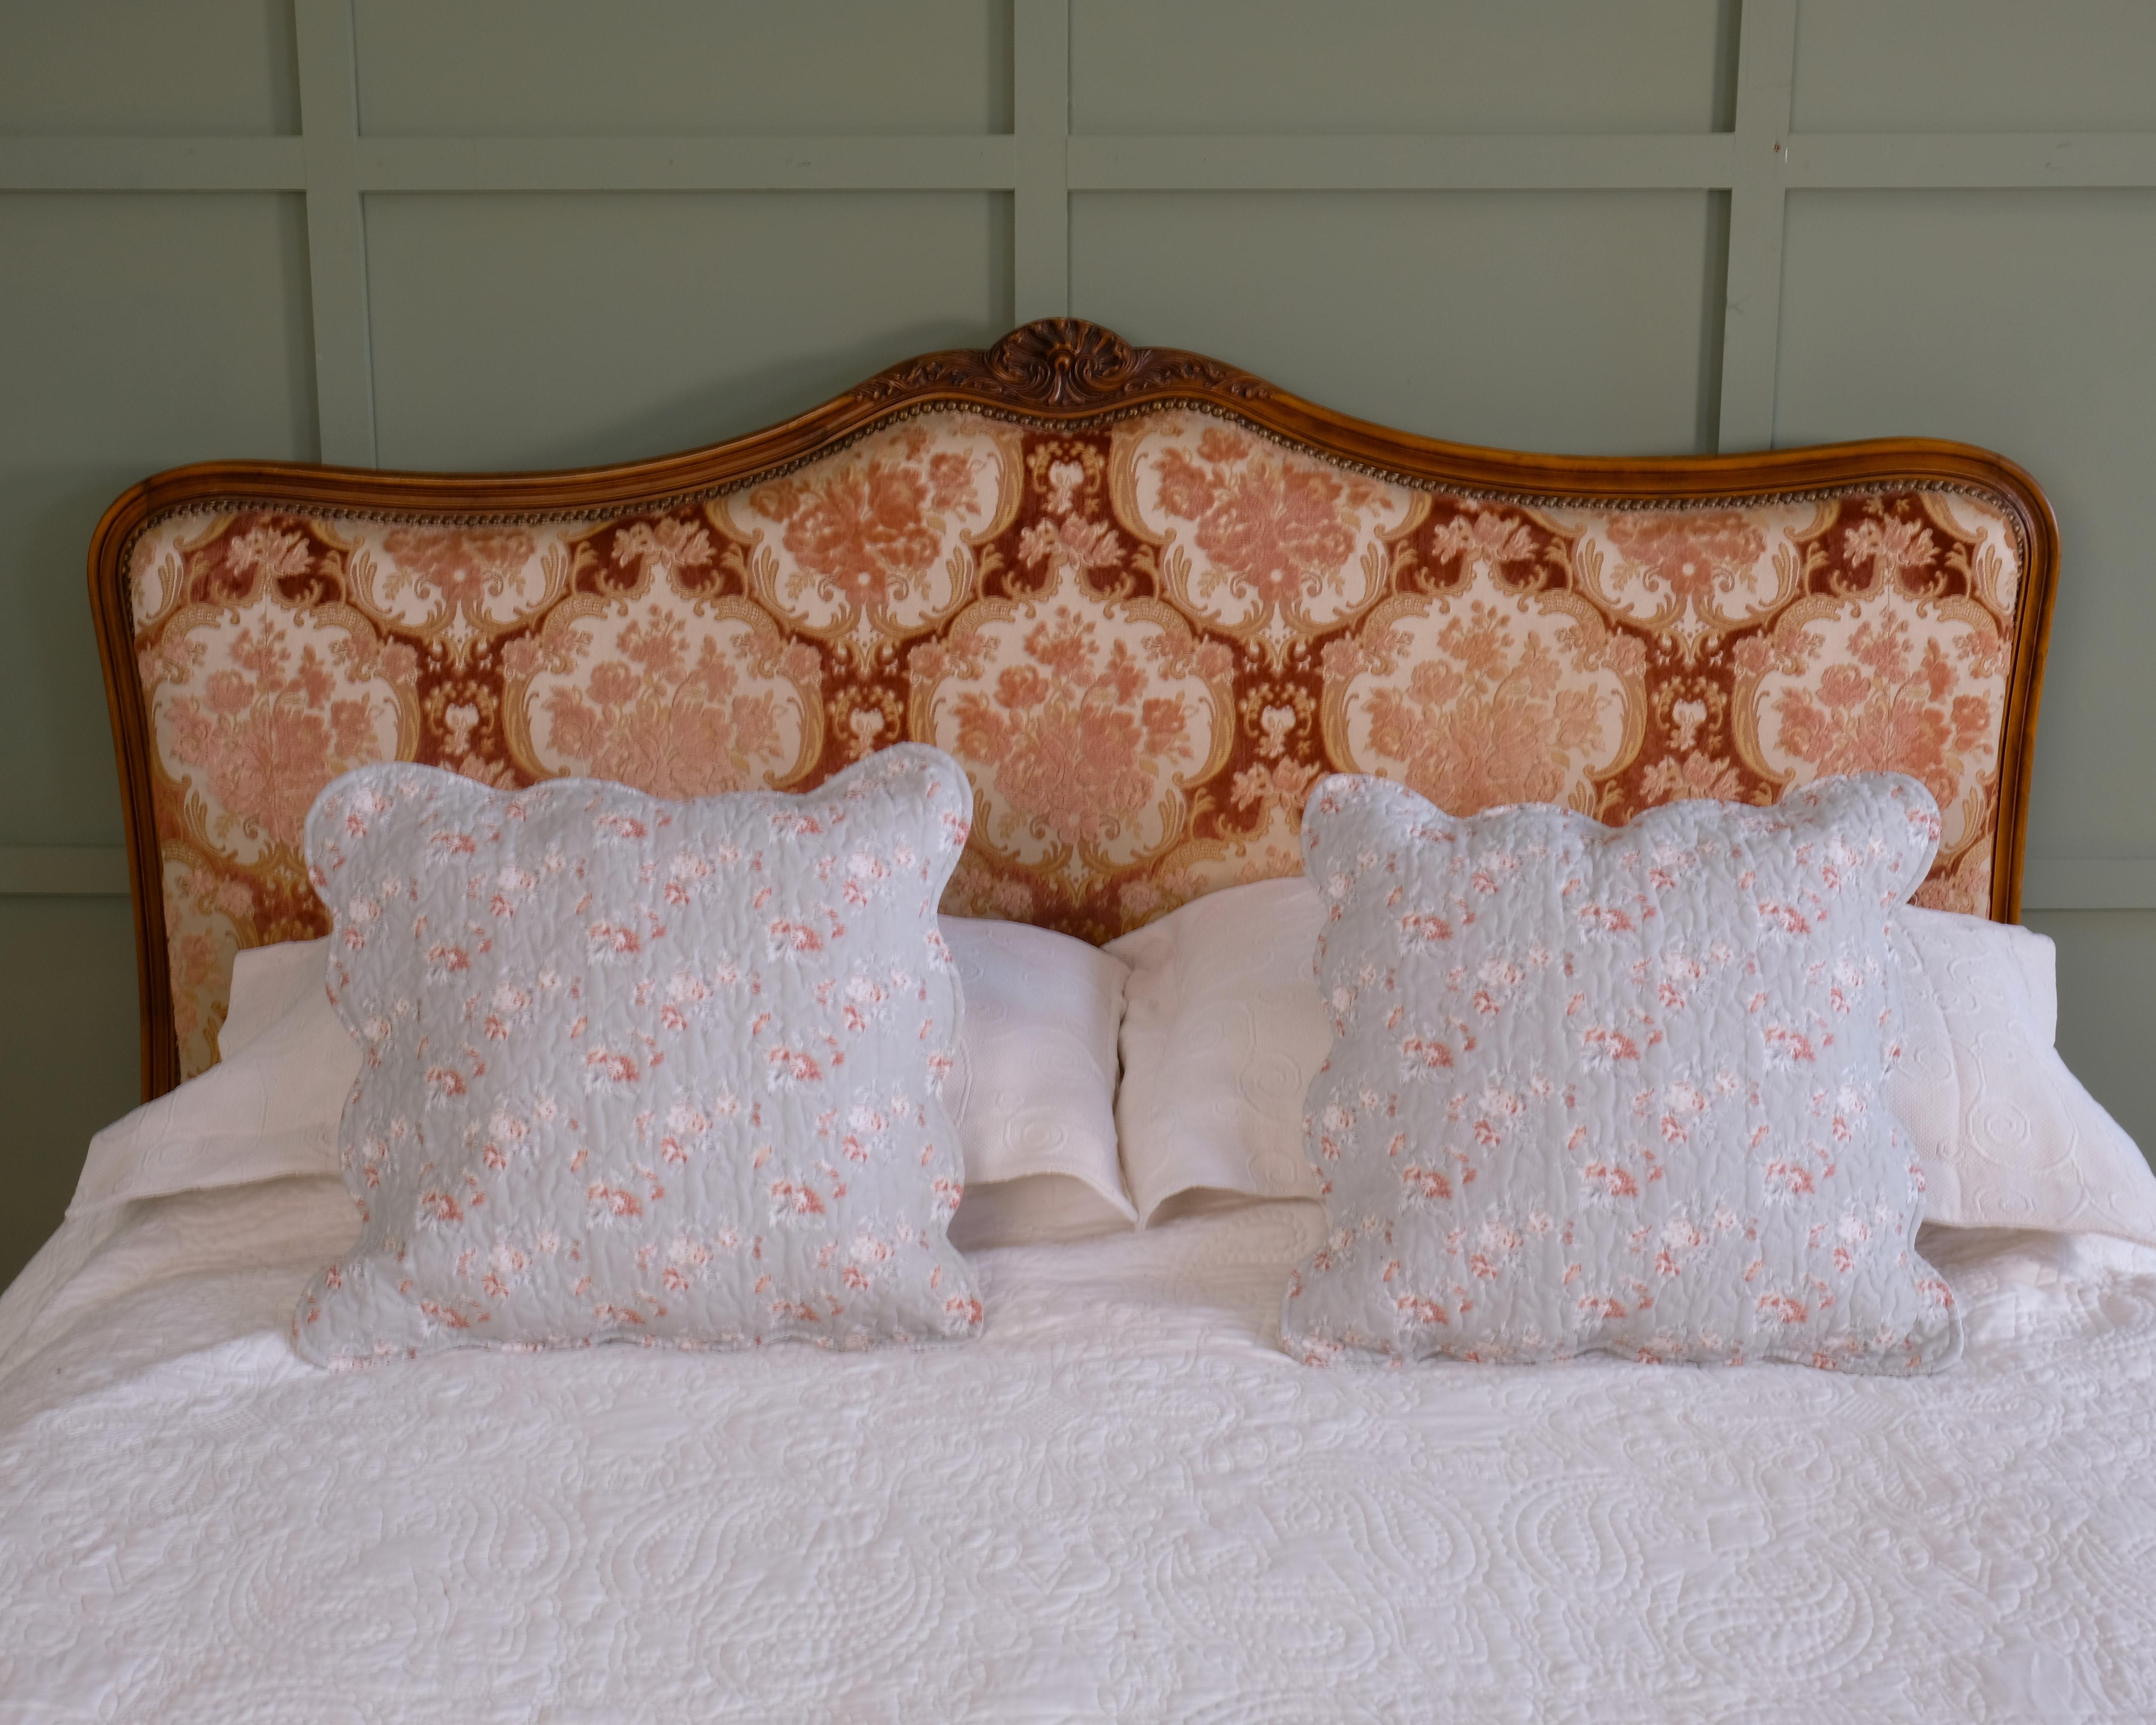 Small super king or large king size bedframe. A very smart looking bed with the original wooden frame and stunning flock velvet fabric. This is the original fabric and it is in excellent condition. The colours are a peachy, pink, coral with a creamy